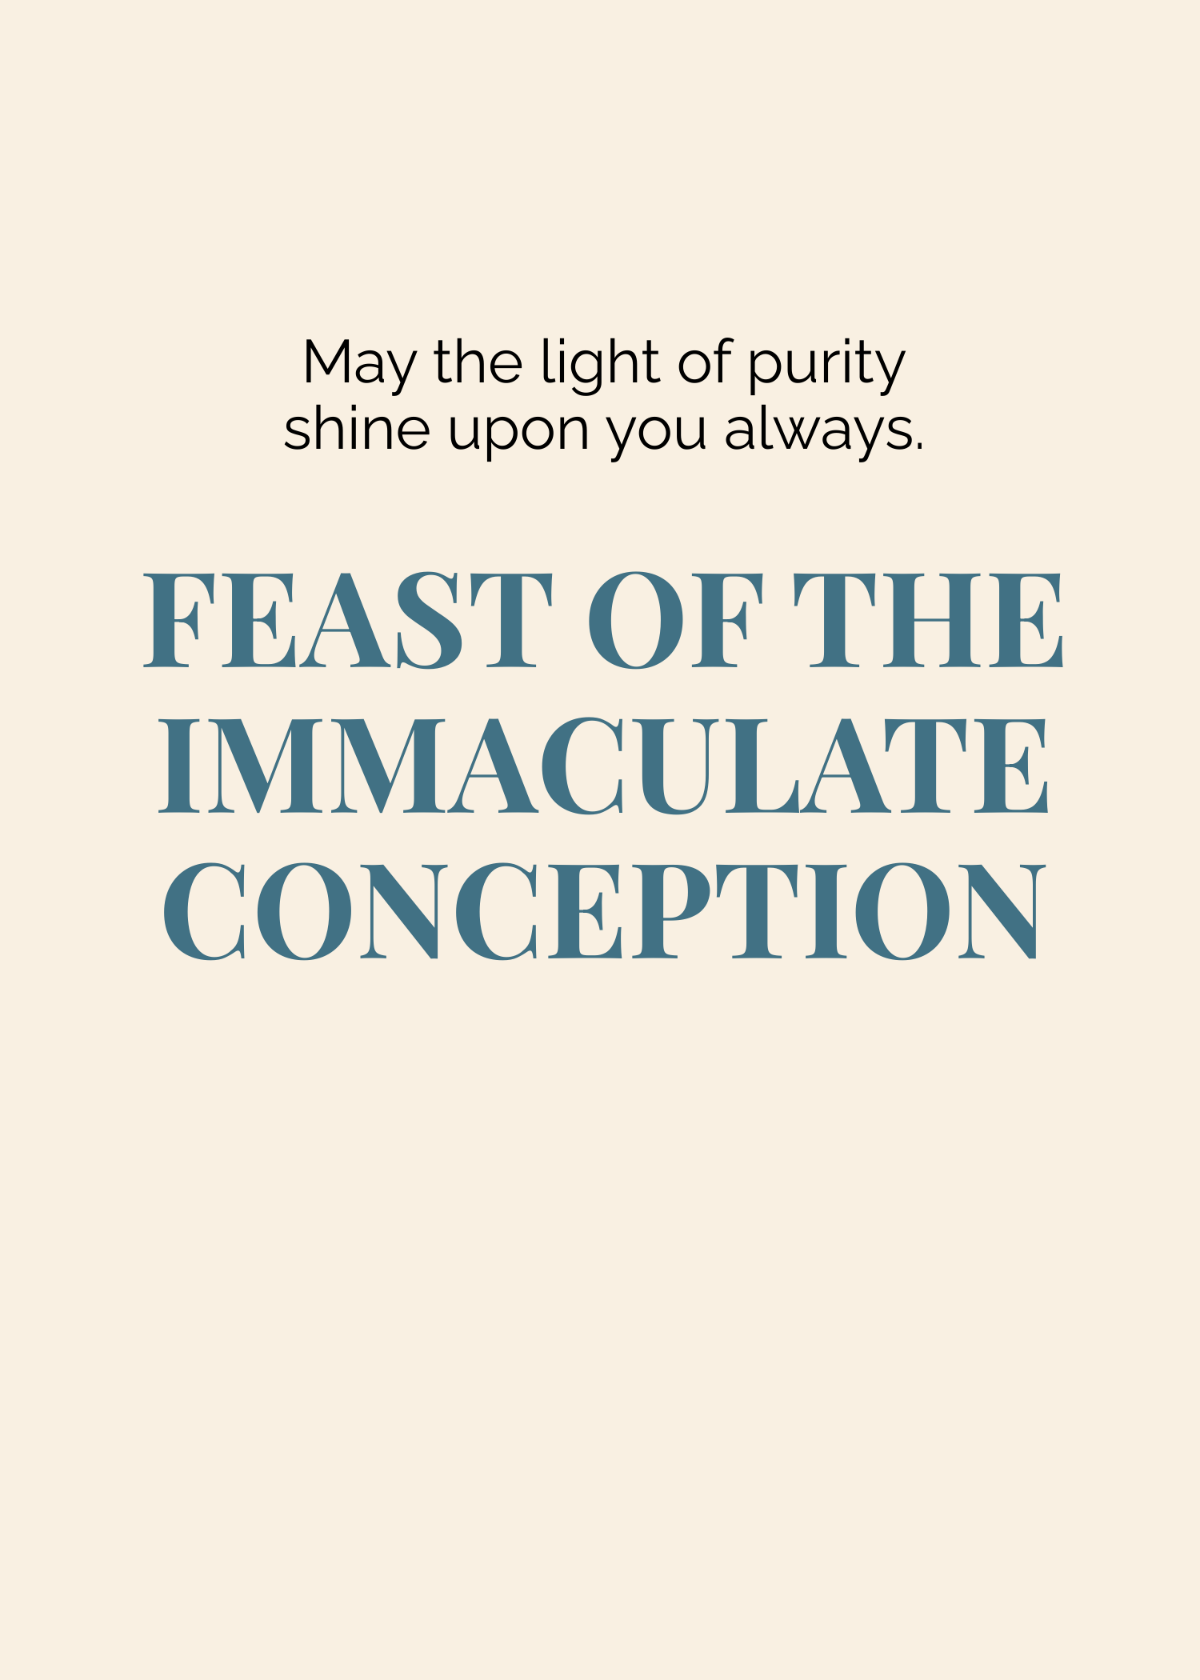 Feast of the Immaculate Conception Message Wishes Template